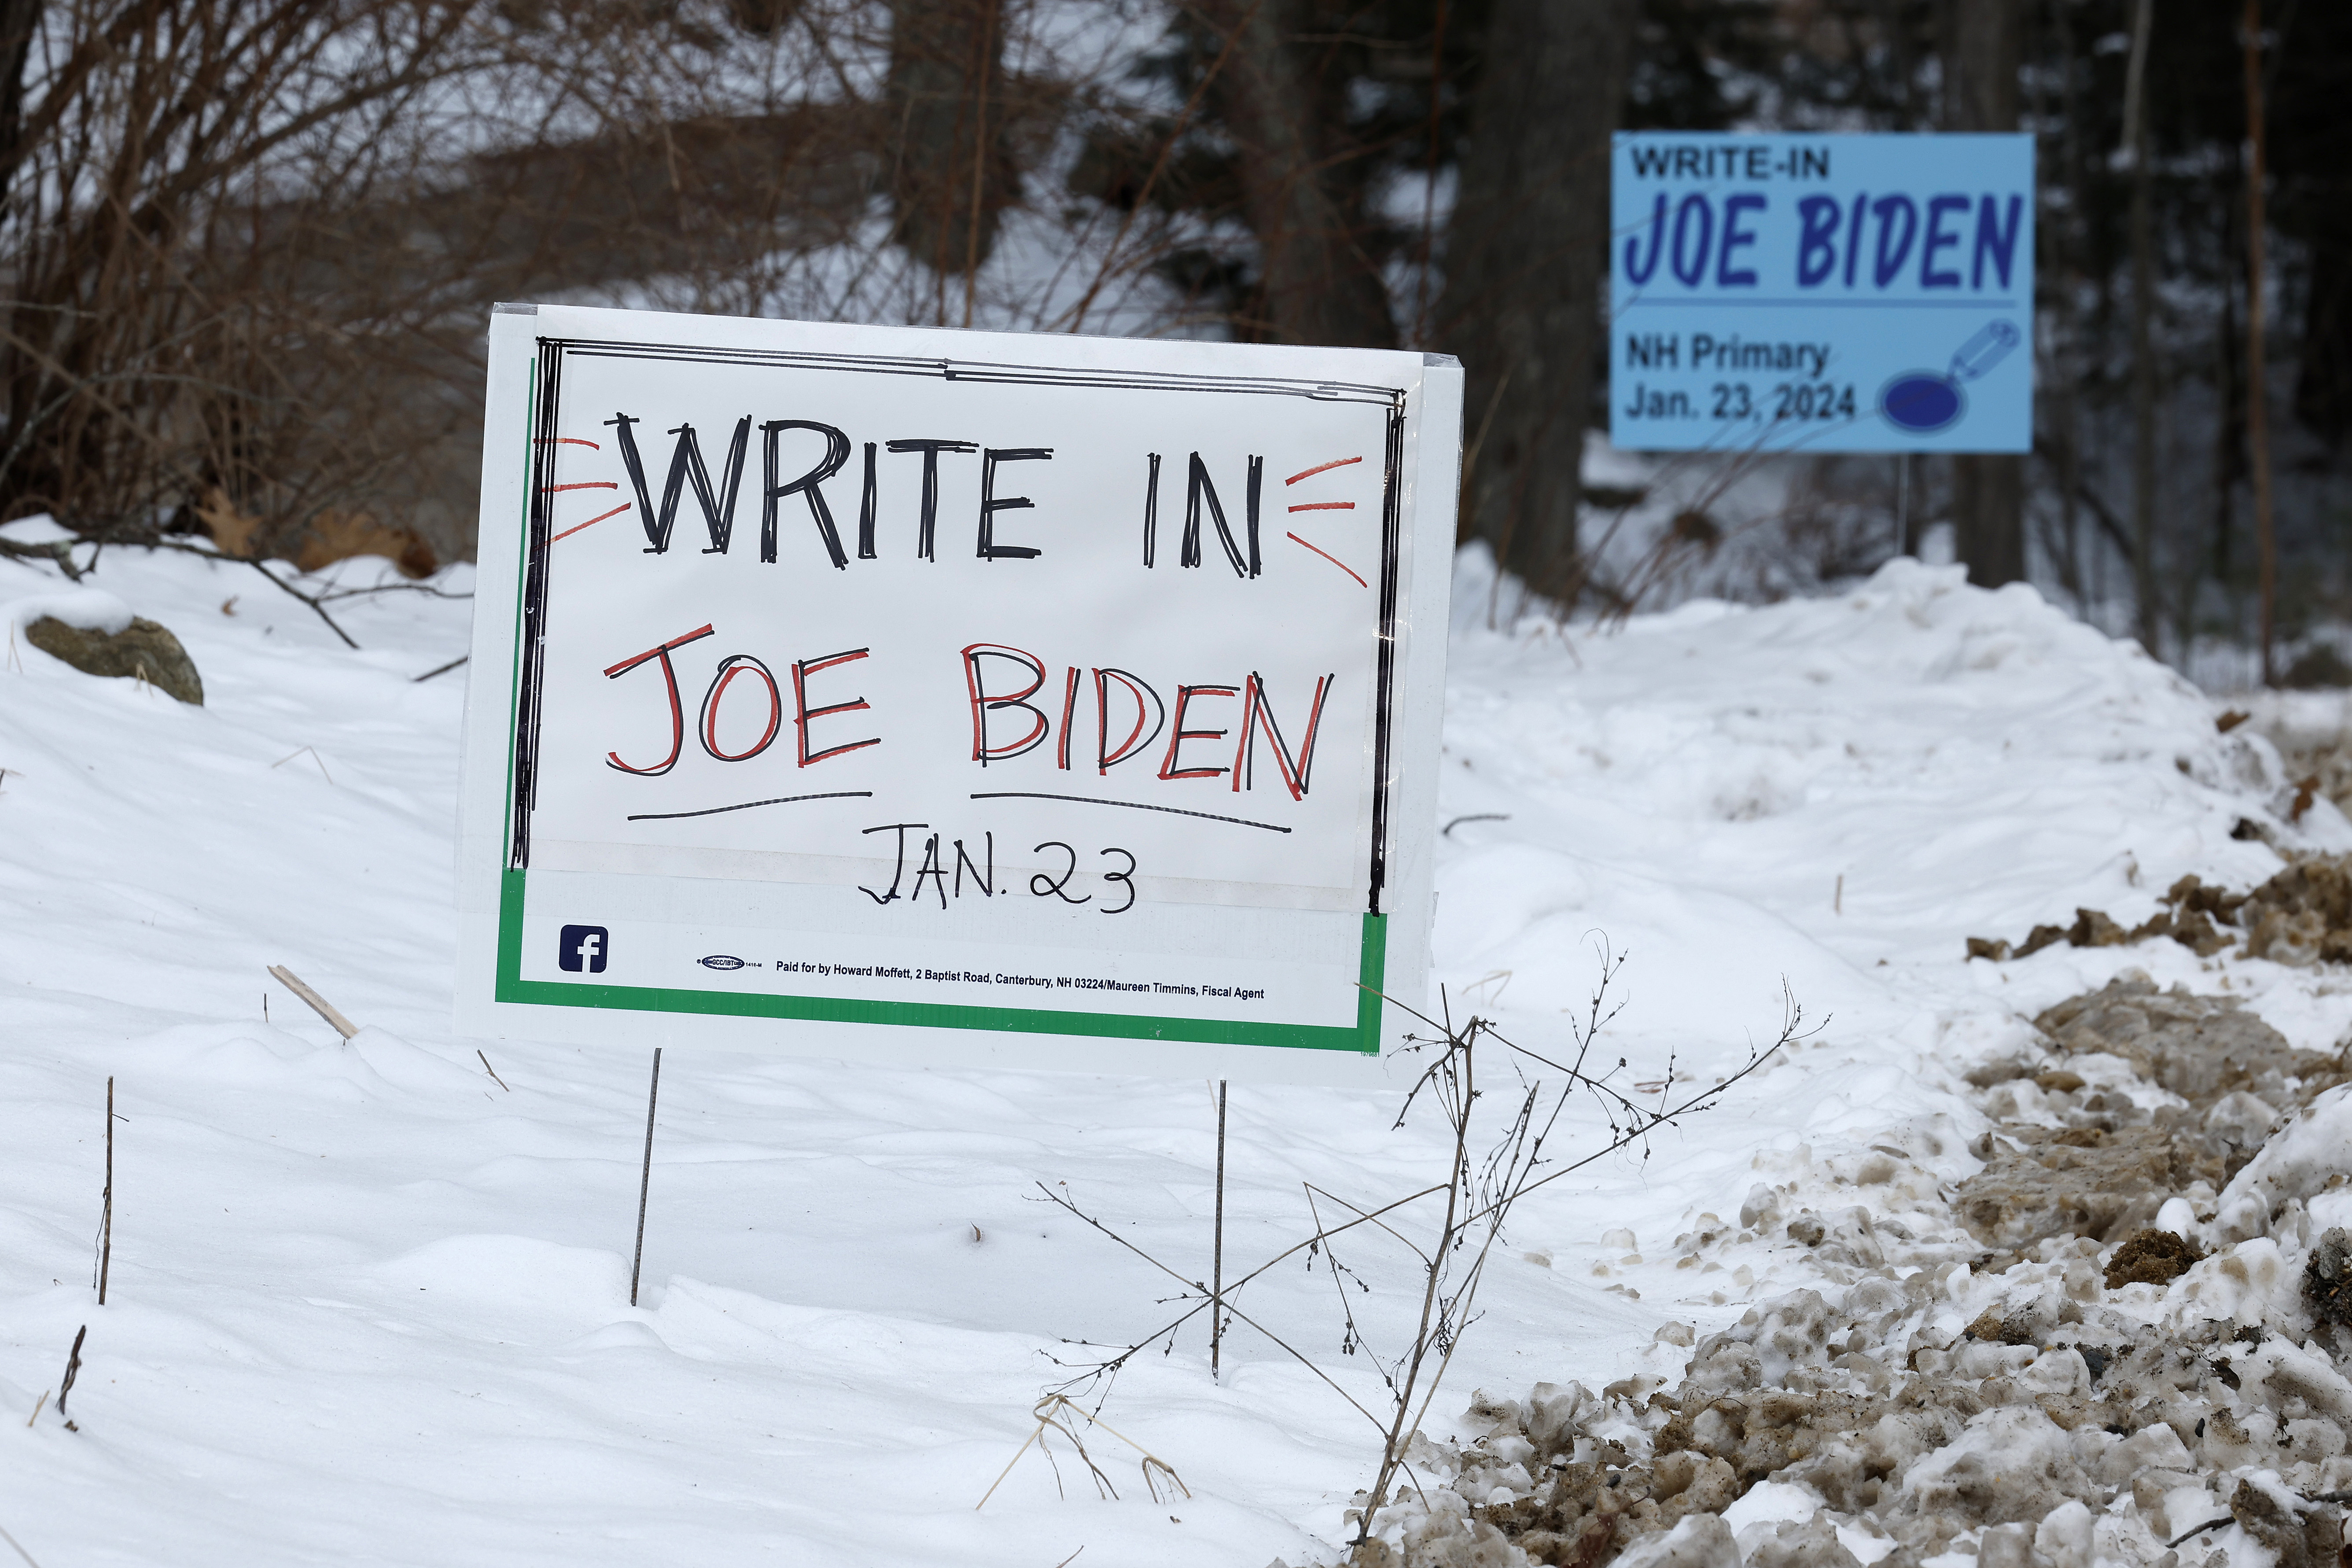 Campaign signs asking voters to write in President Joe Biden in the New Hampshire primary election stand along the road in Loudon, New Hampshire, on January 19.